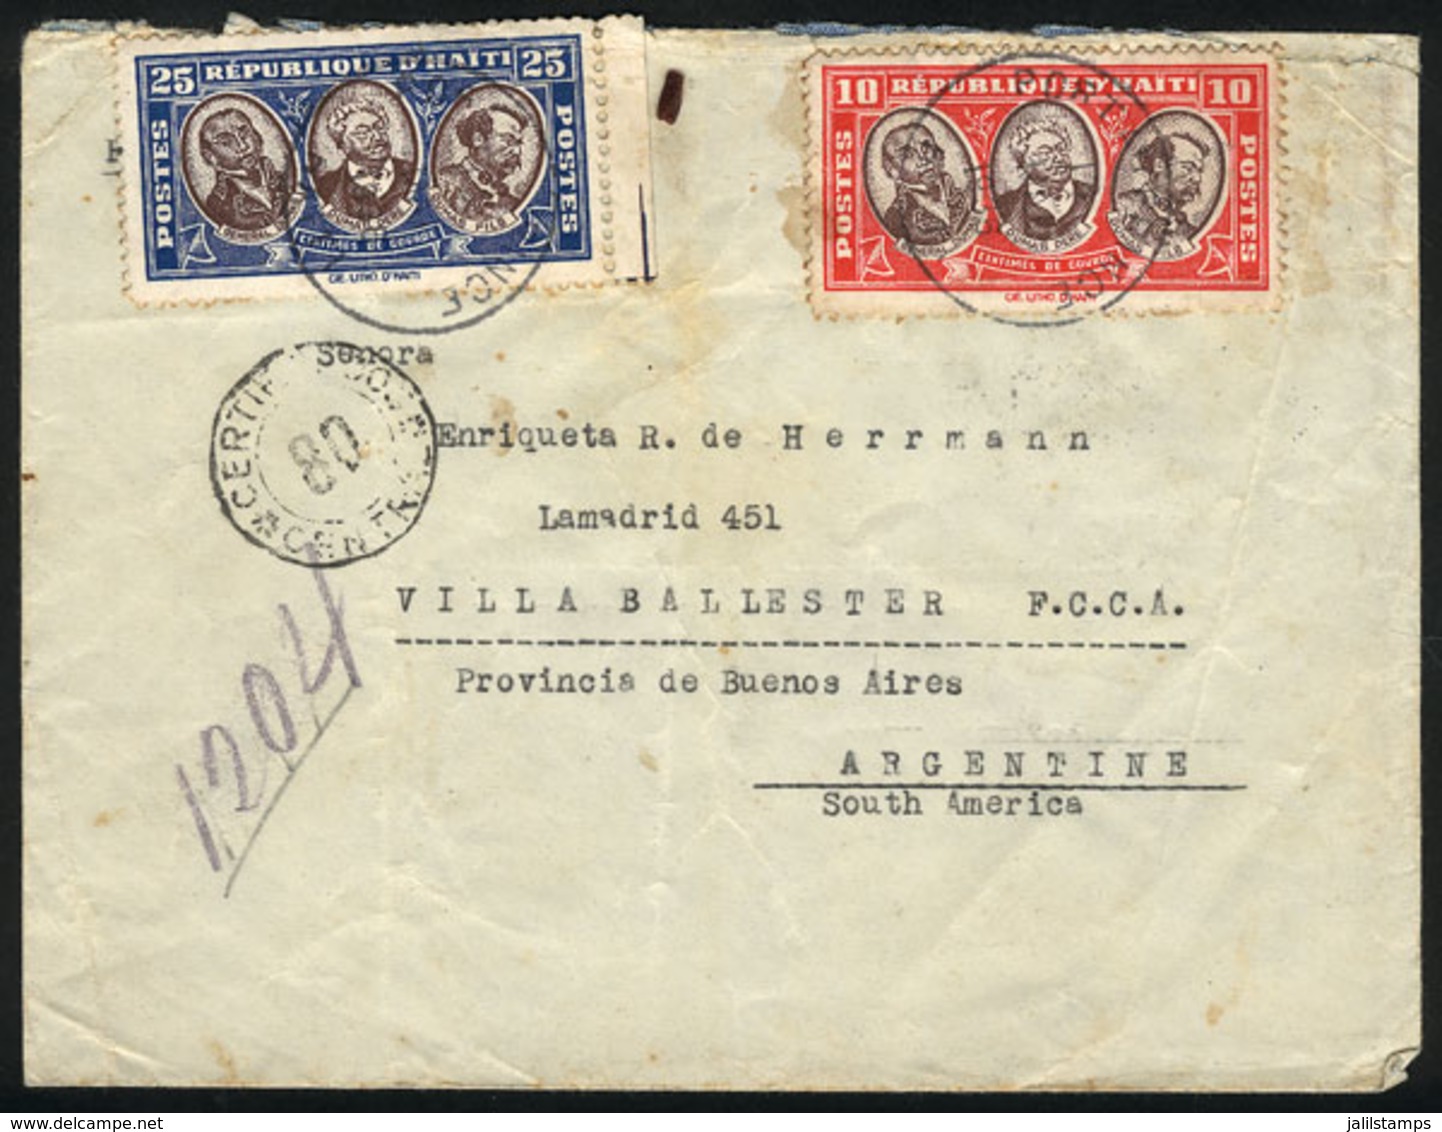 HAITI: Registered Cover Sent From Port-Au-Prince To Buenos Aires On 13/MAY/1936 Franked With 35c., With A Number Of Tran - Haiti